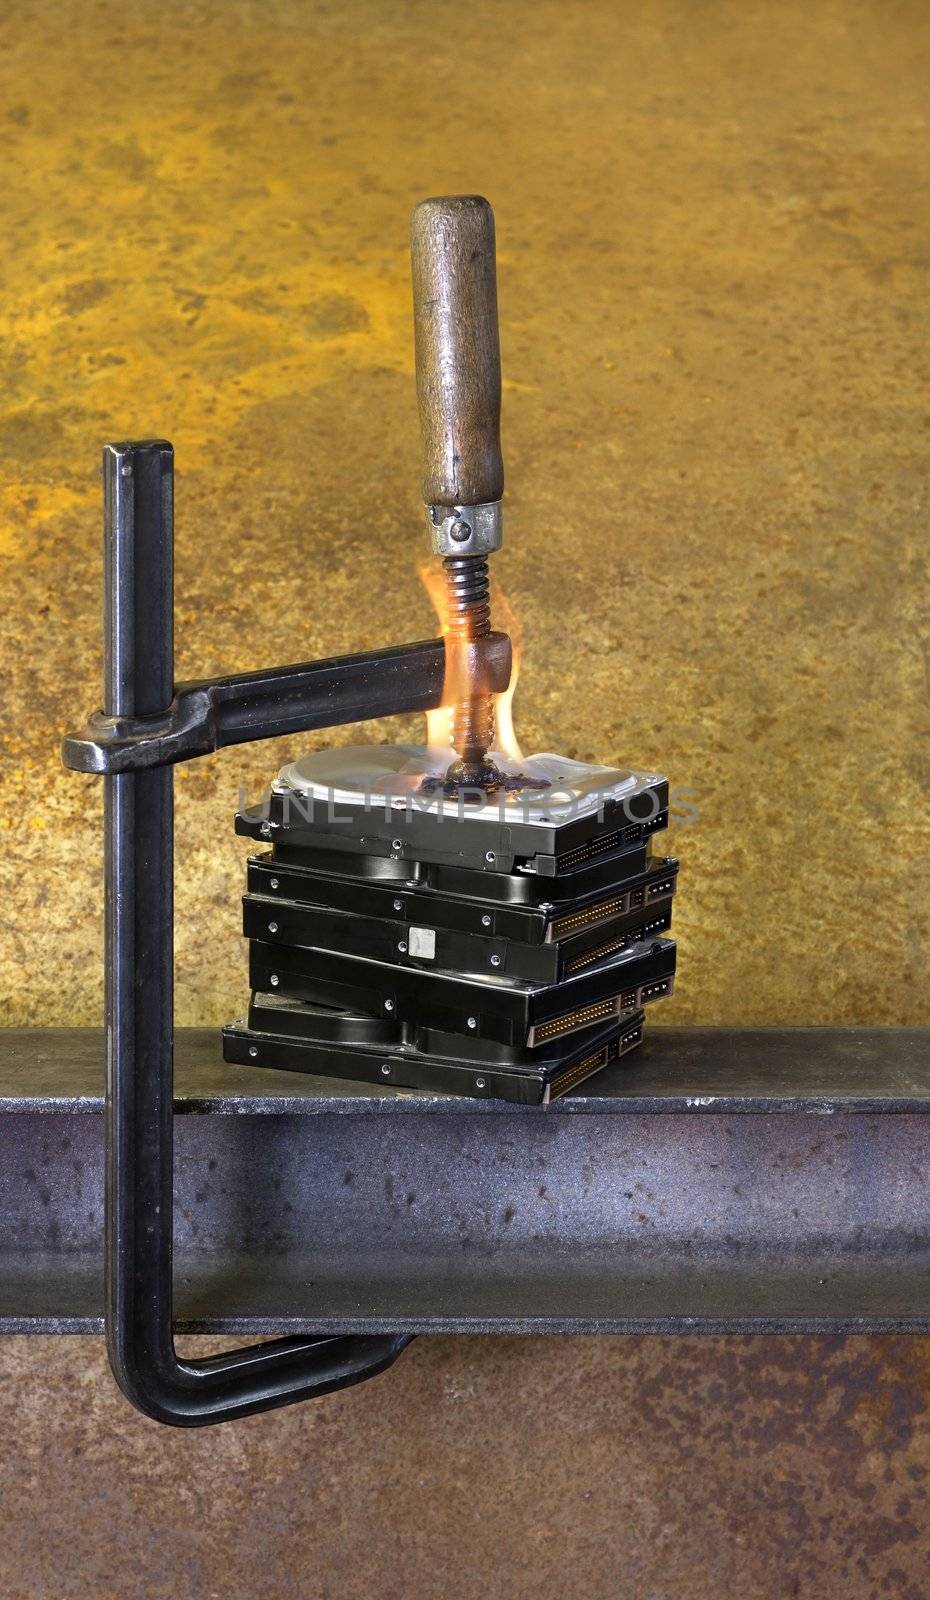 clamp pressing on stack of burning hard drives in rusty background